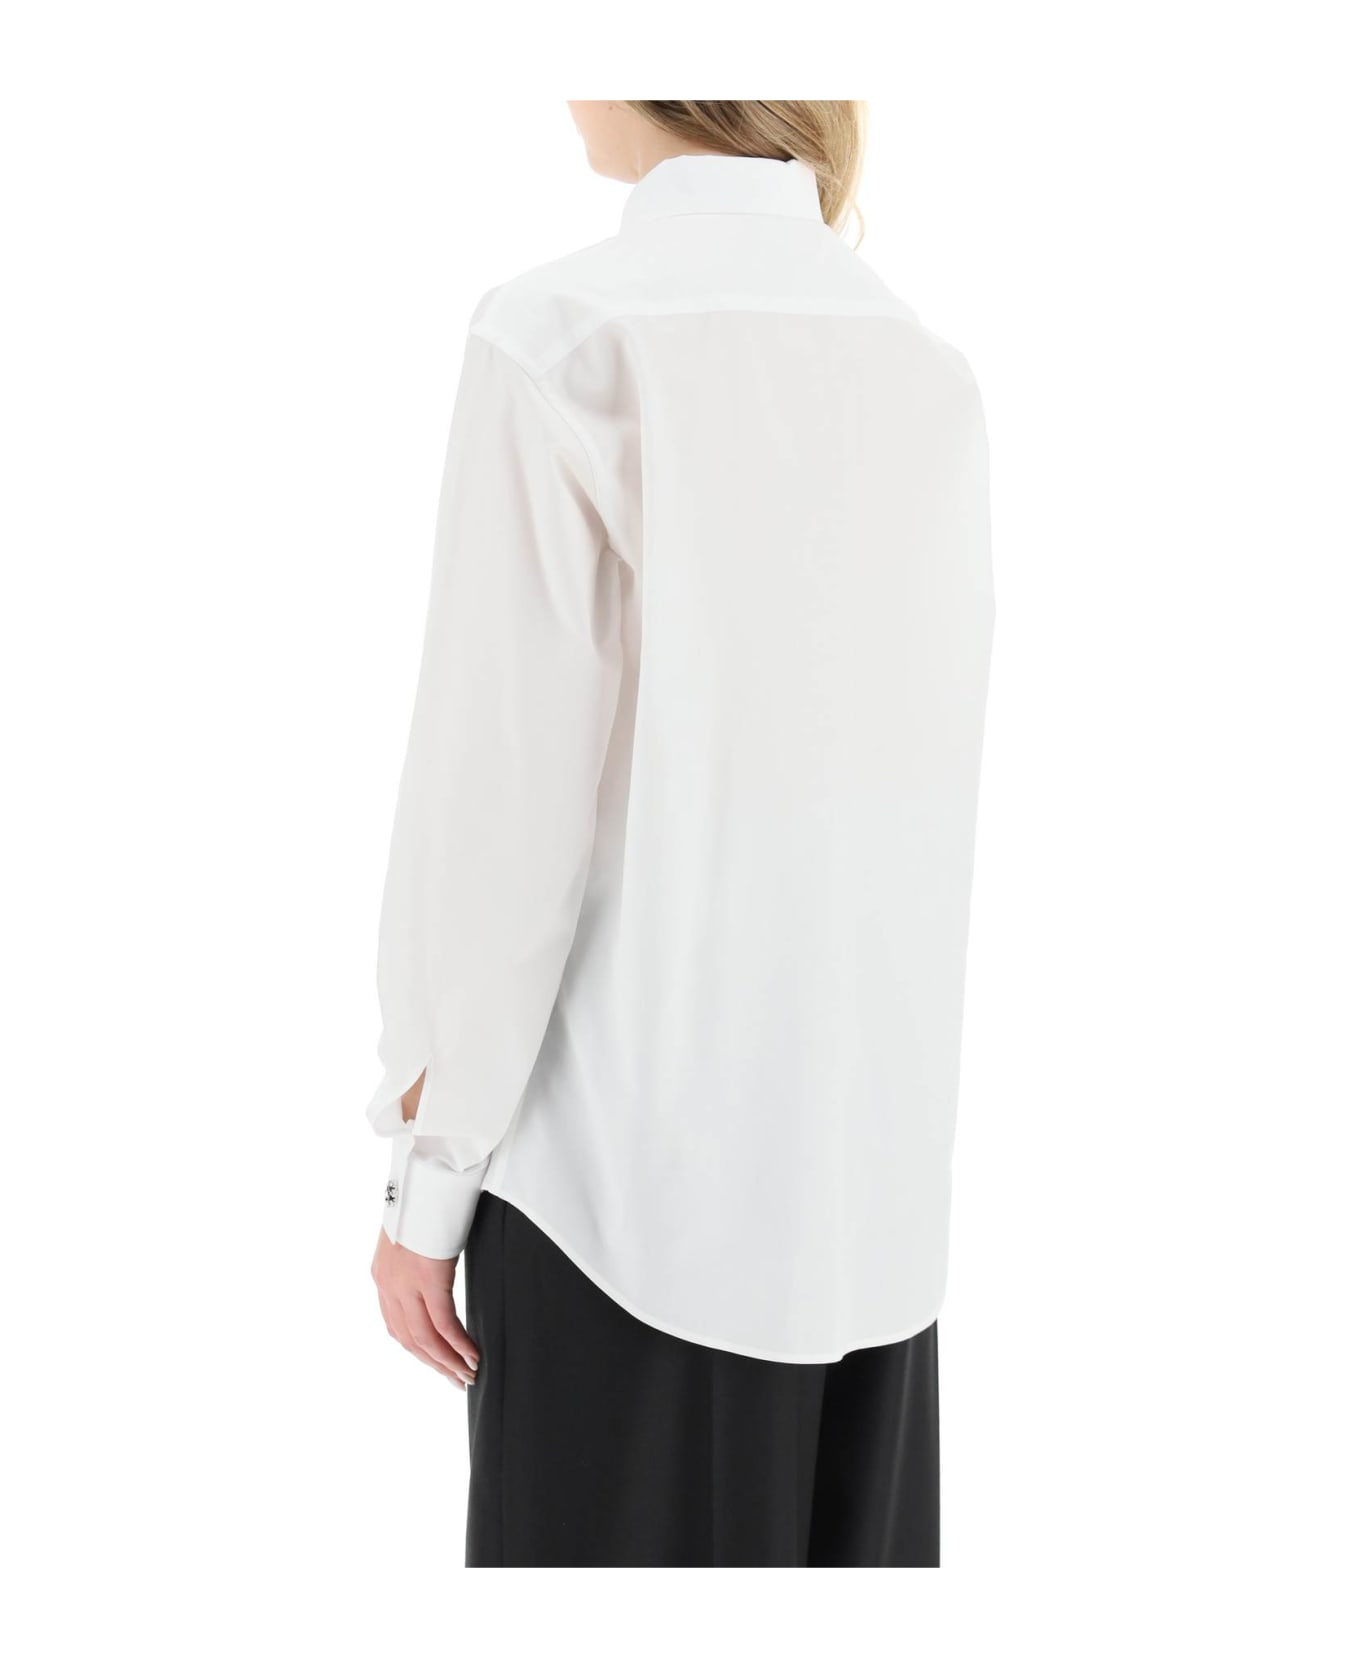 N.21 Shirt With Jewel Buttons - BIANCO OTTICO (White)